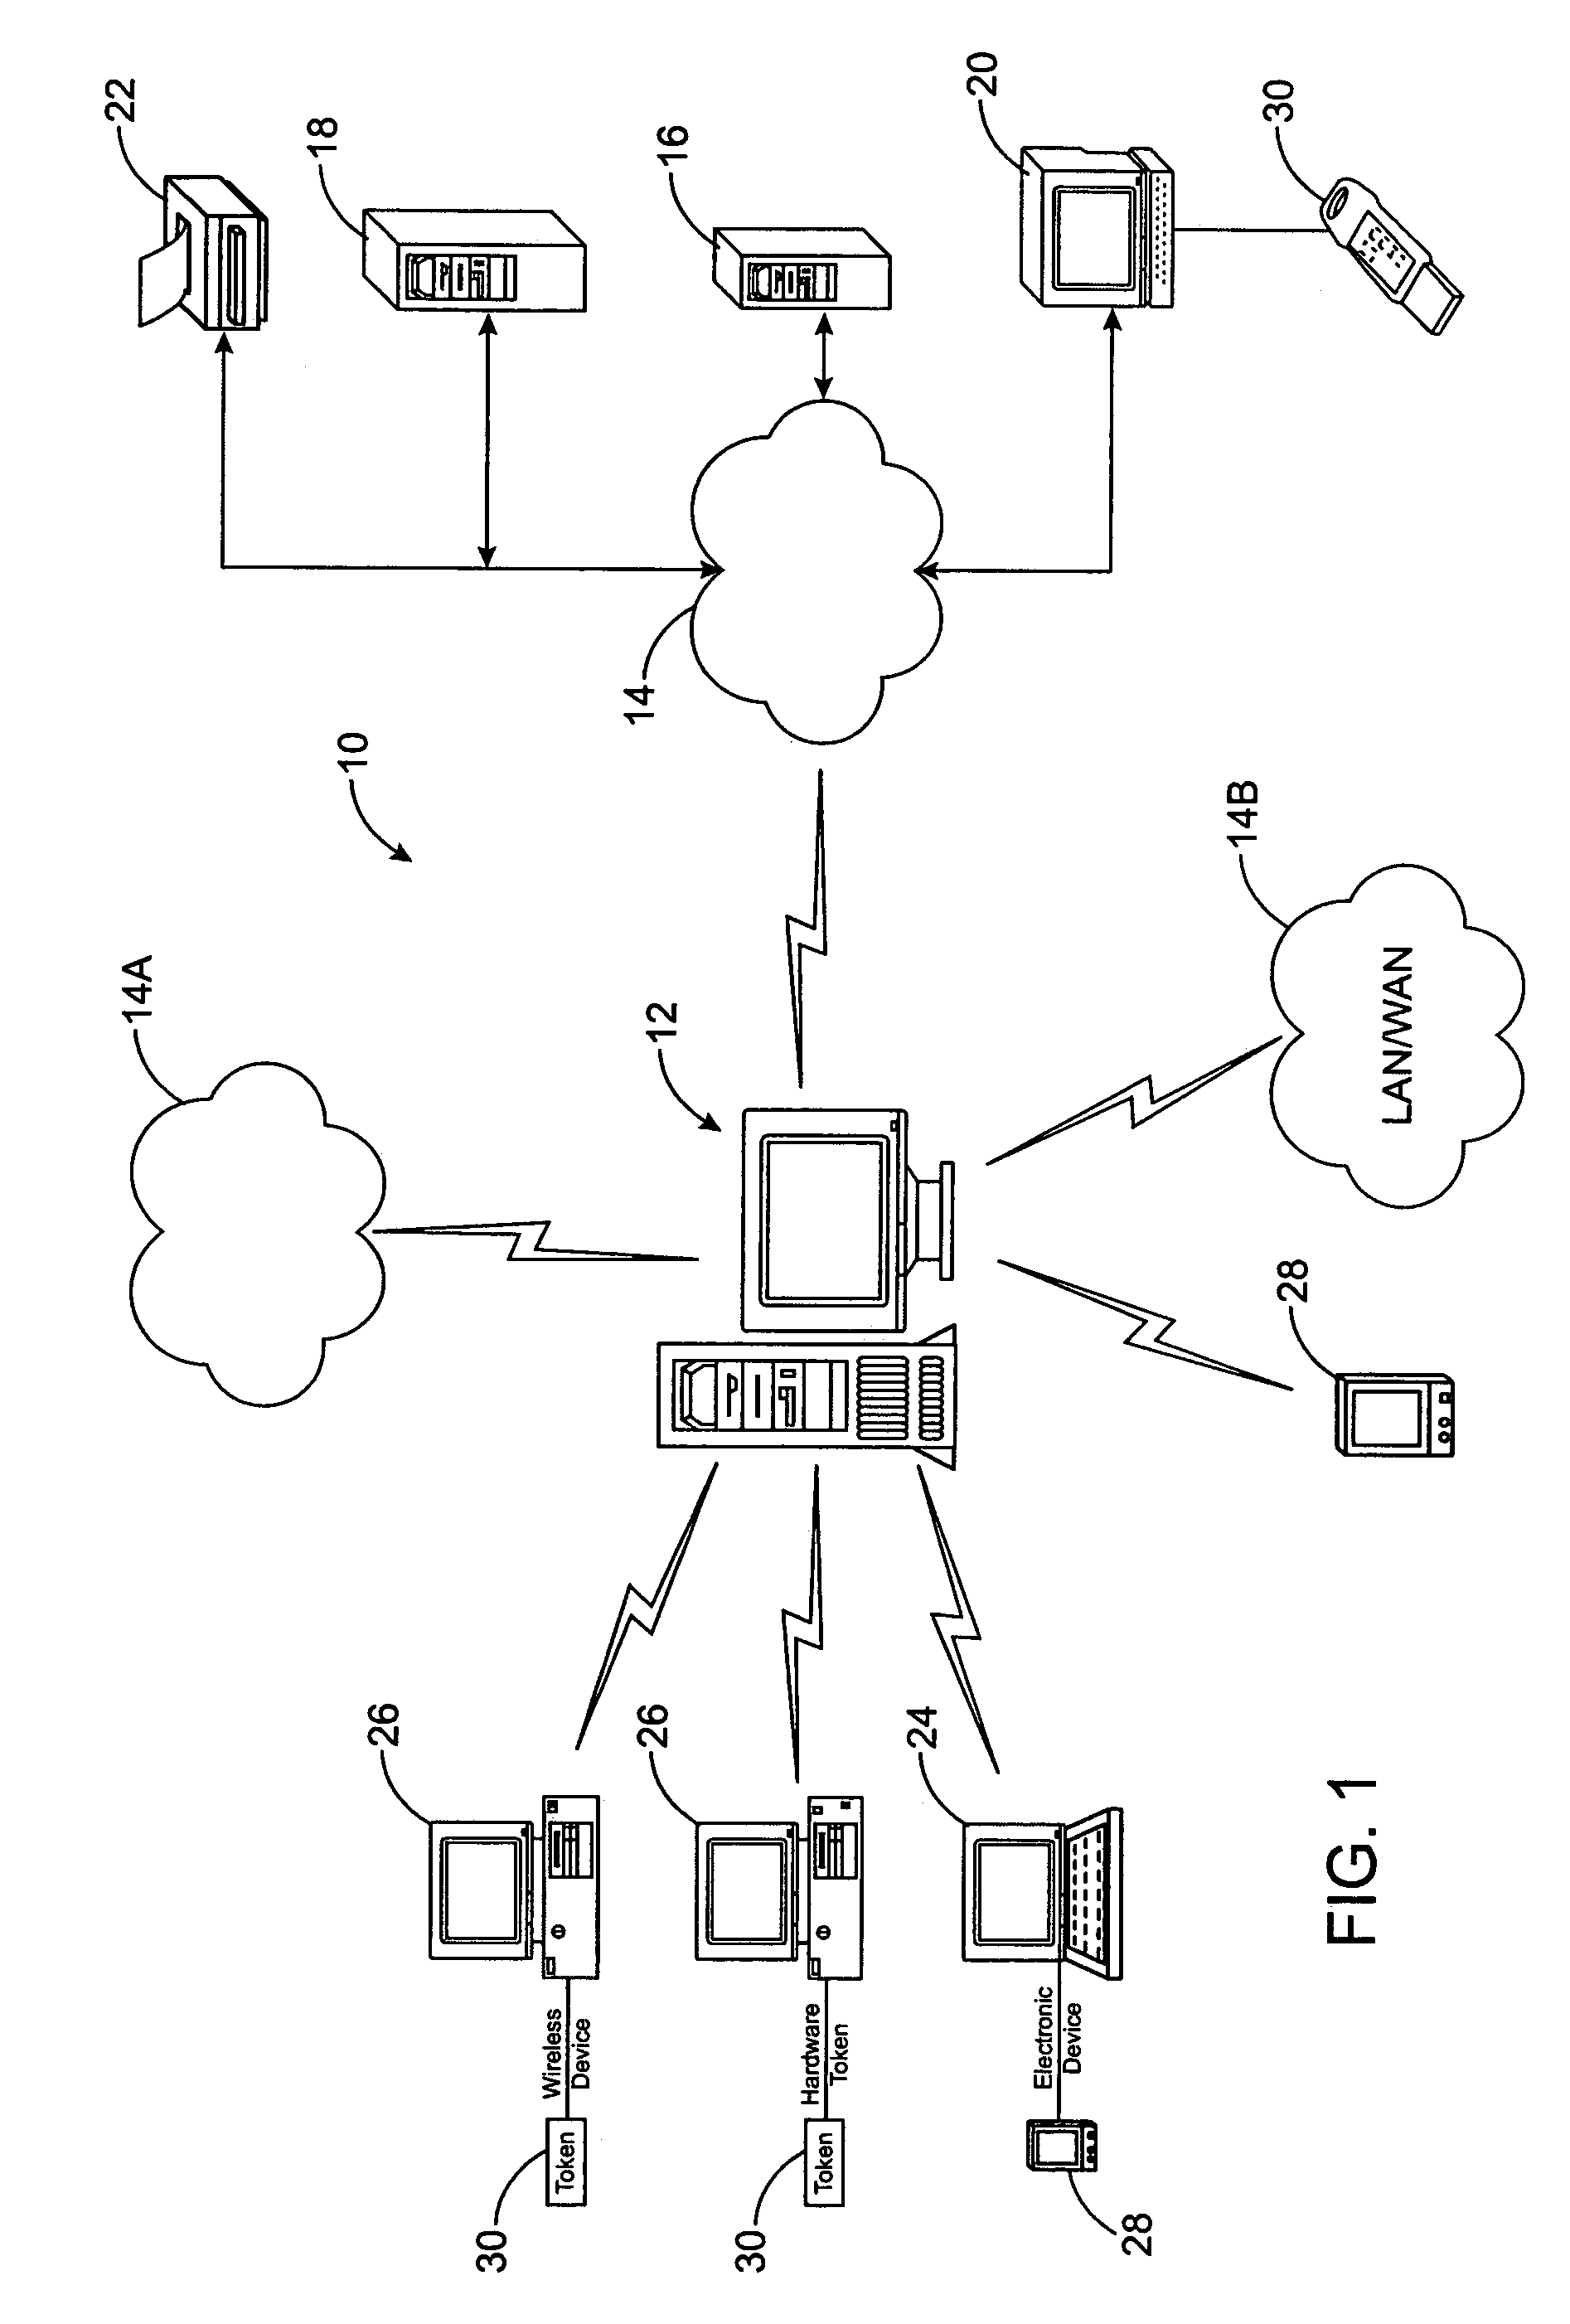 System and method for strong access control to a network